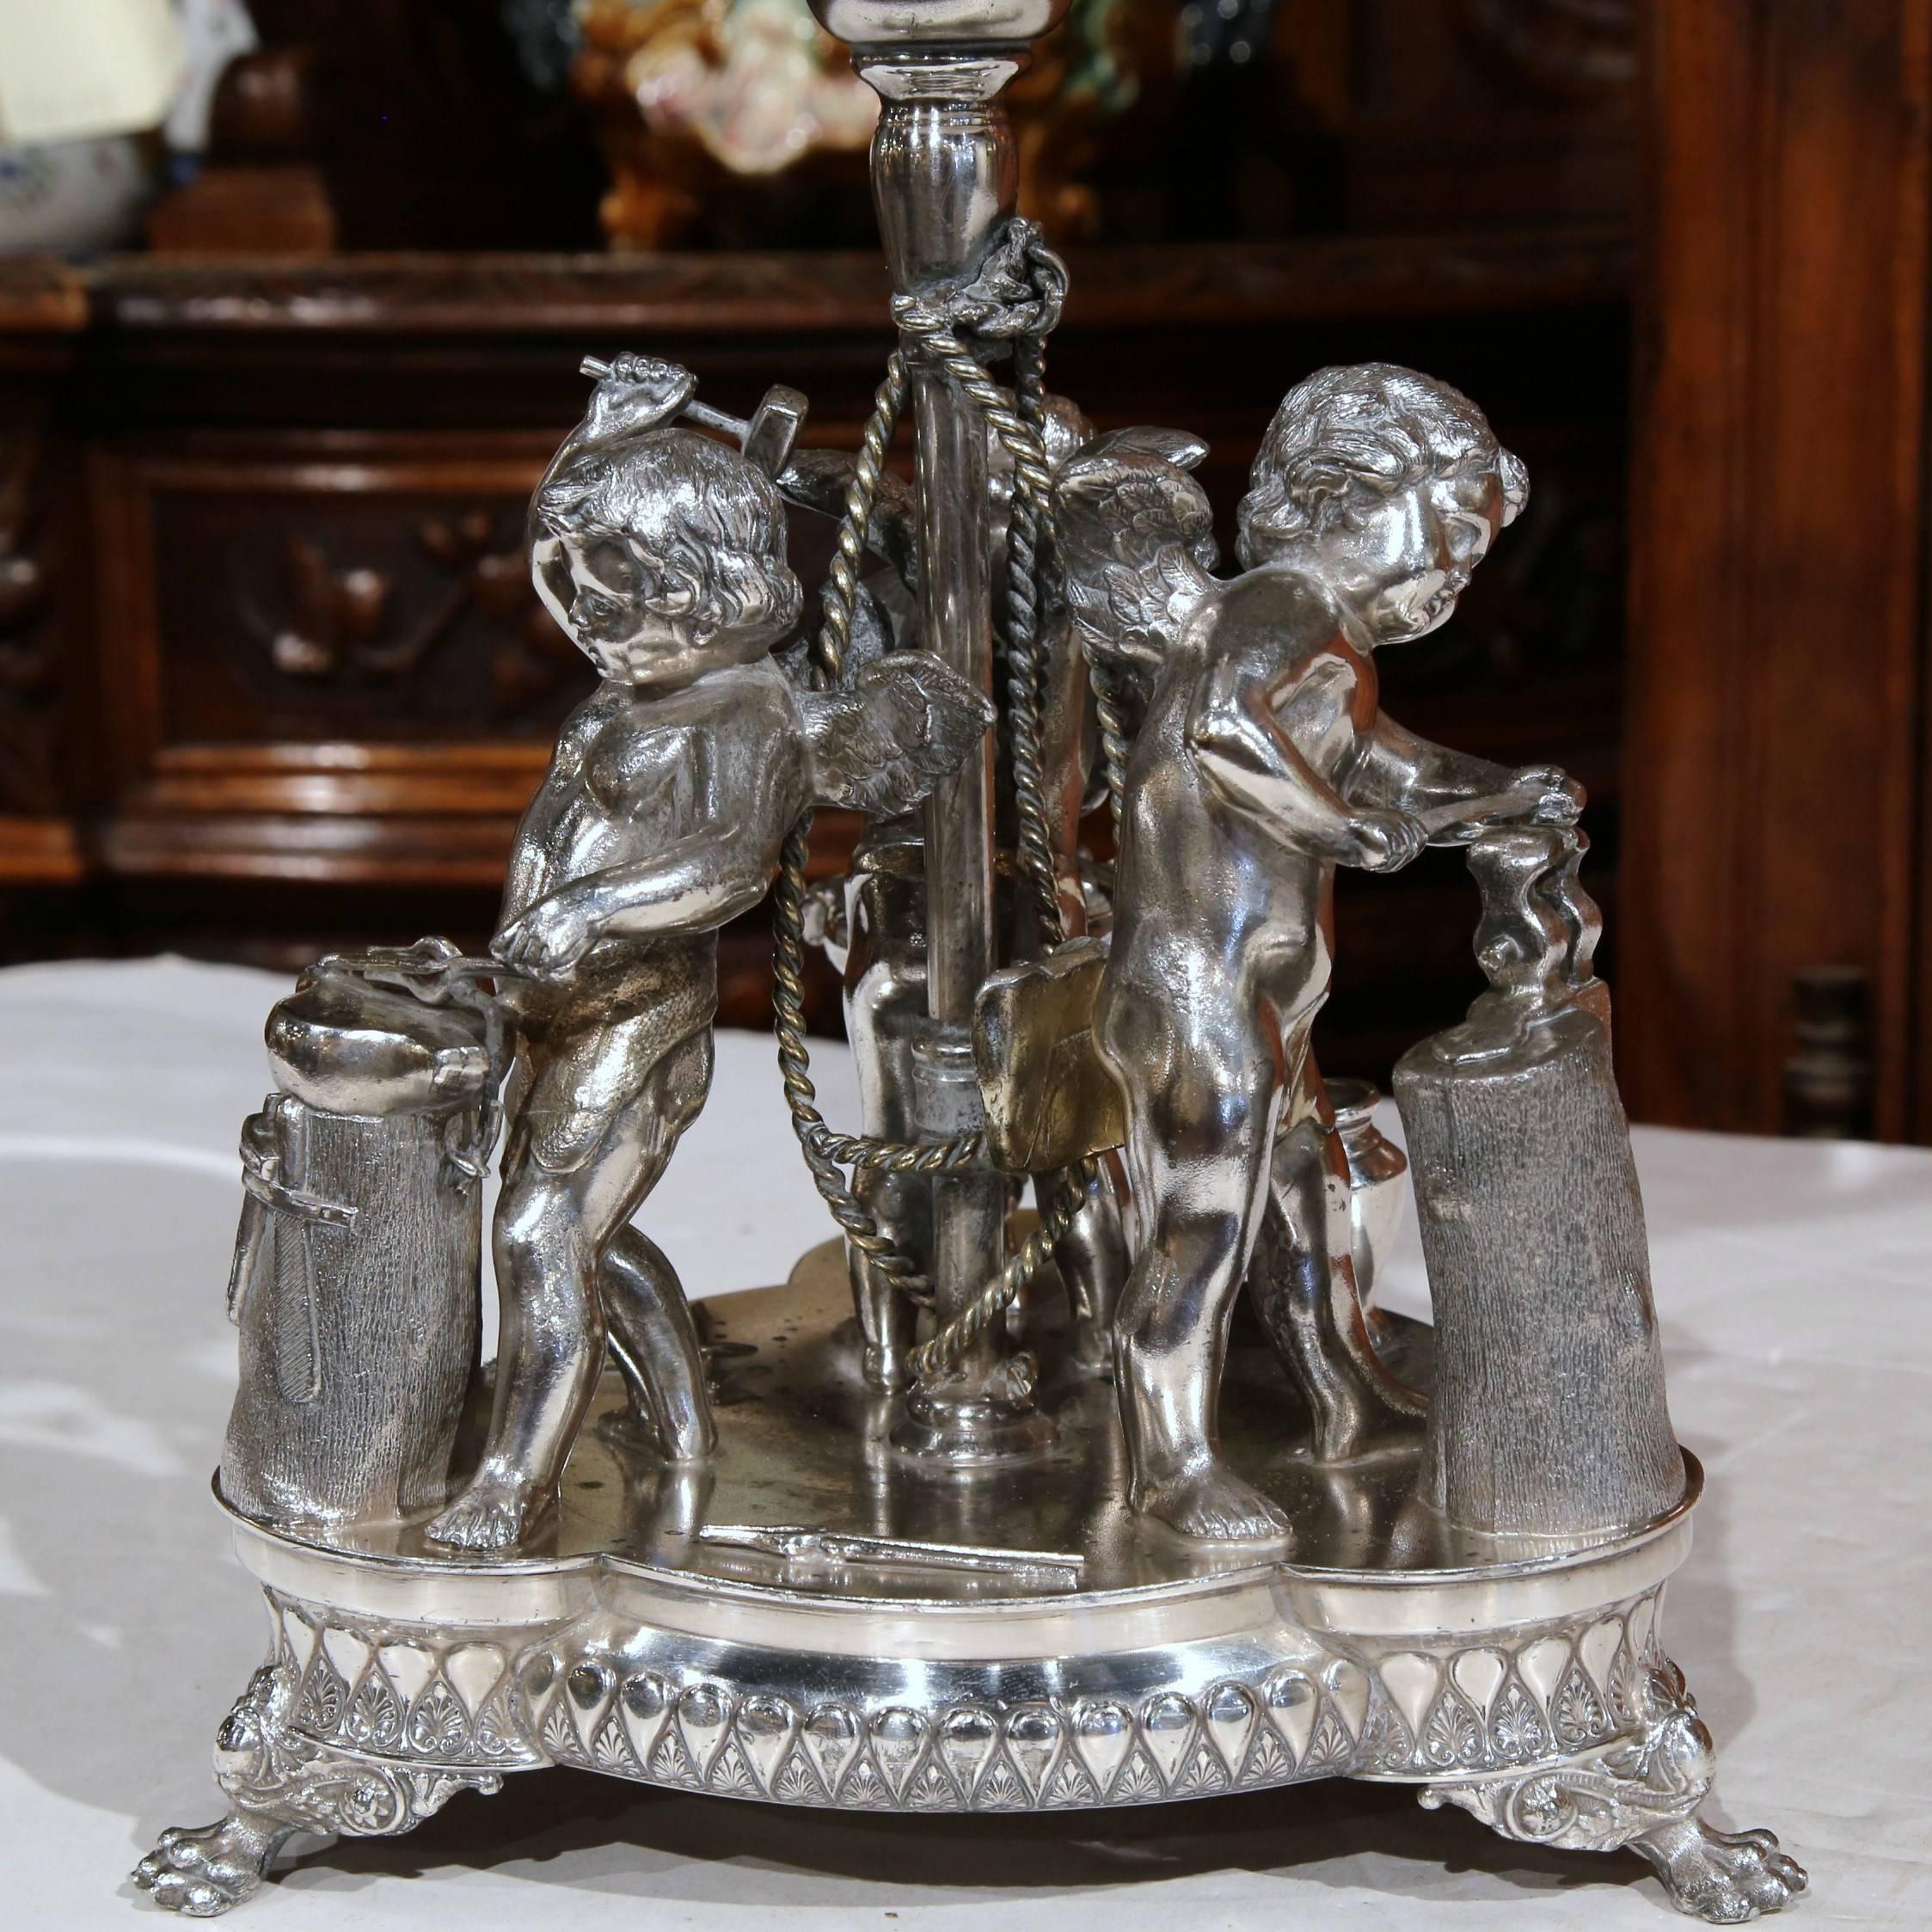 Hand-Crafted 19th Century French Silver Plated Crystal Bowl Centerpiece with Cherub Figures